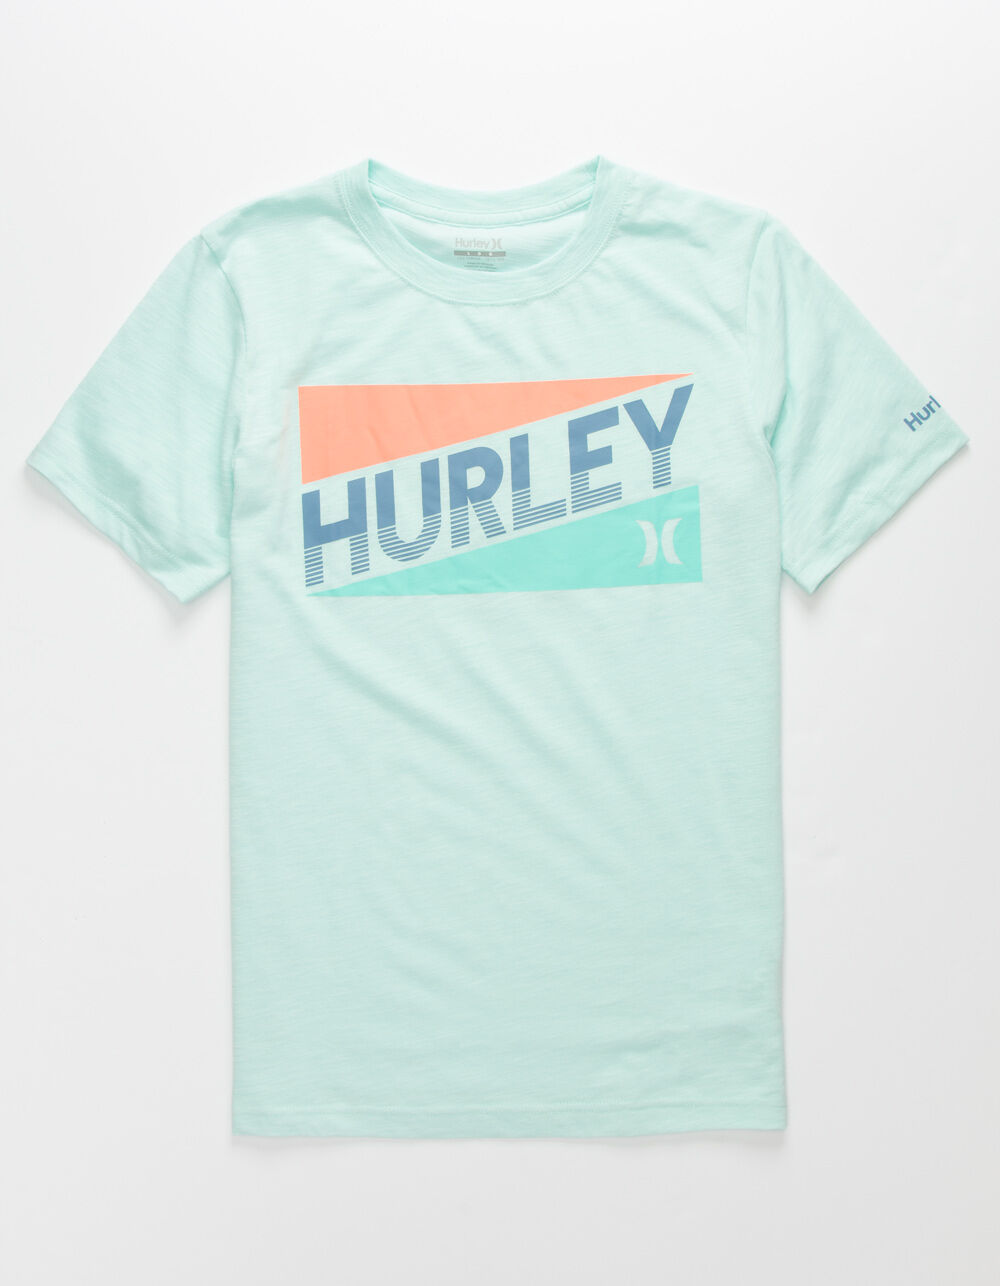 HURLEY New Stadium Lines Mint Boys T-Shirt image number 0